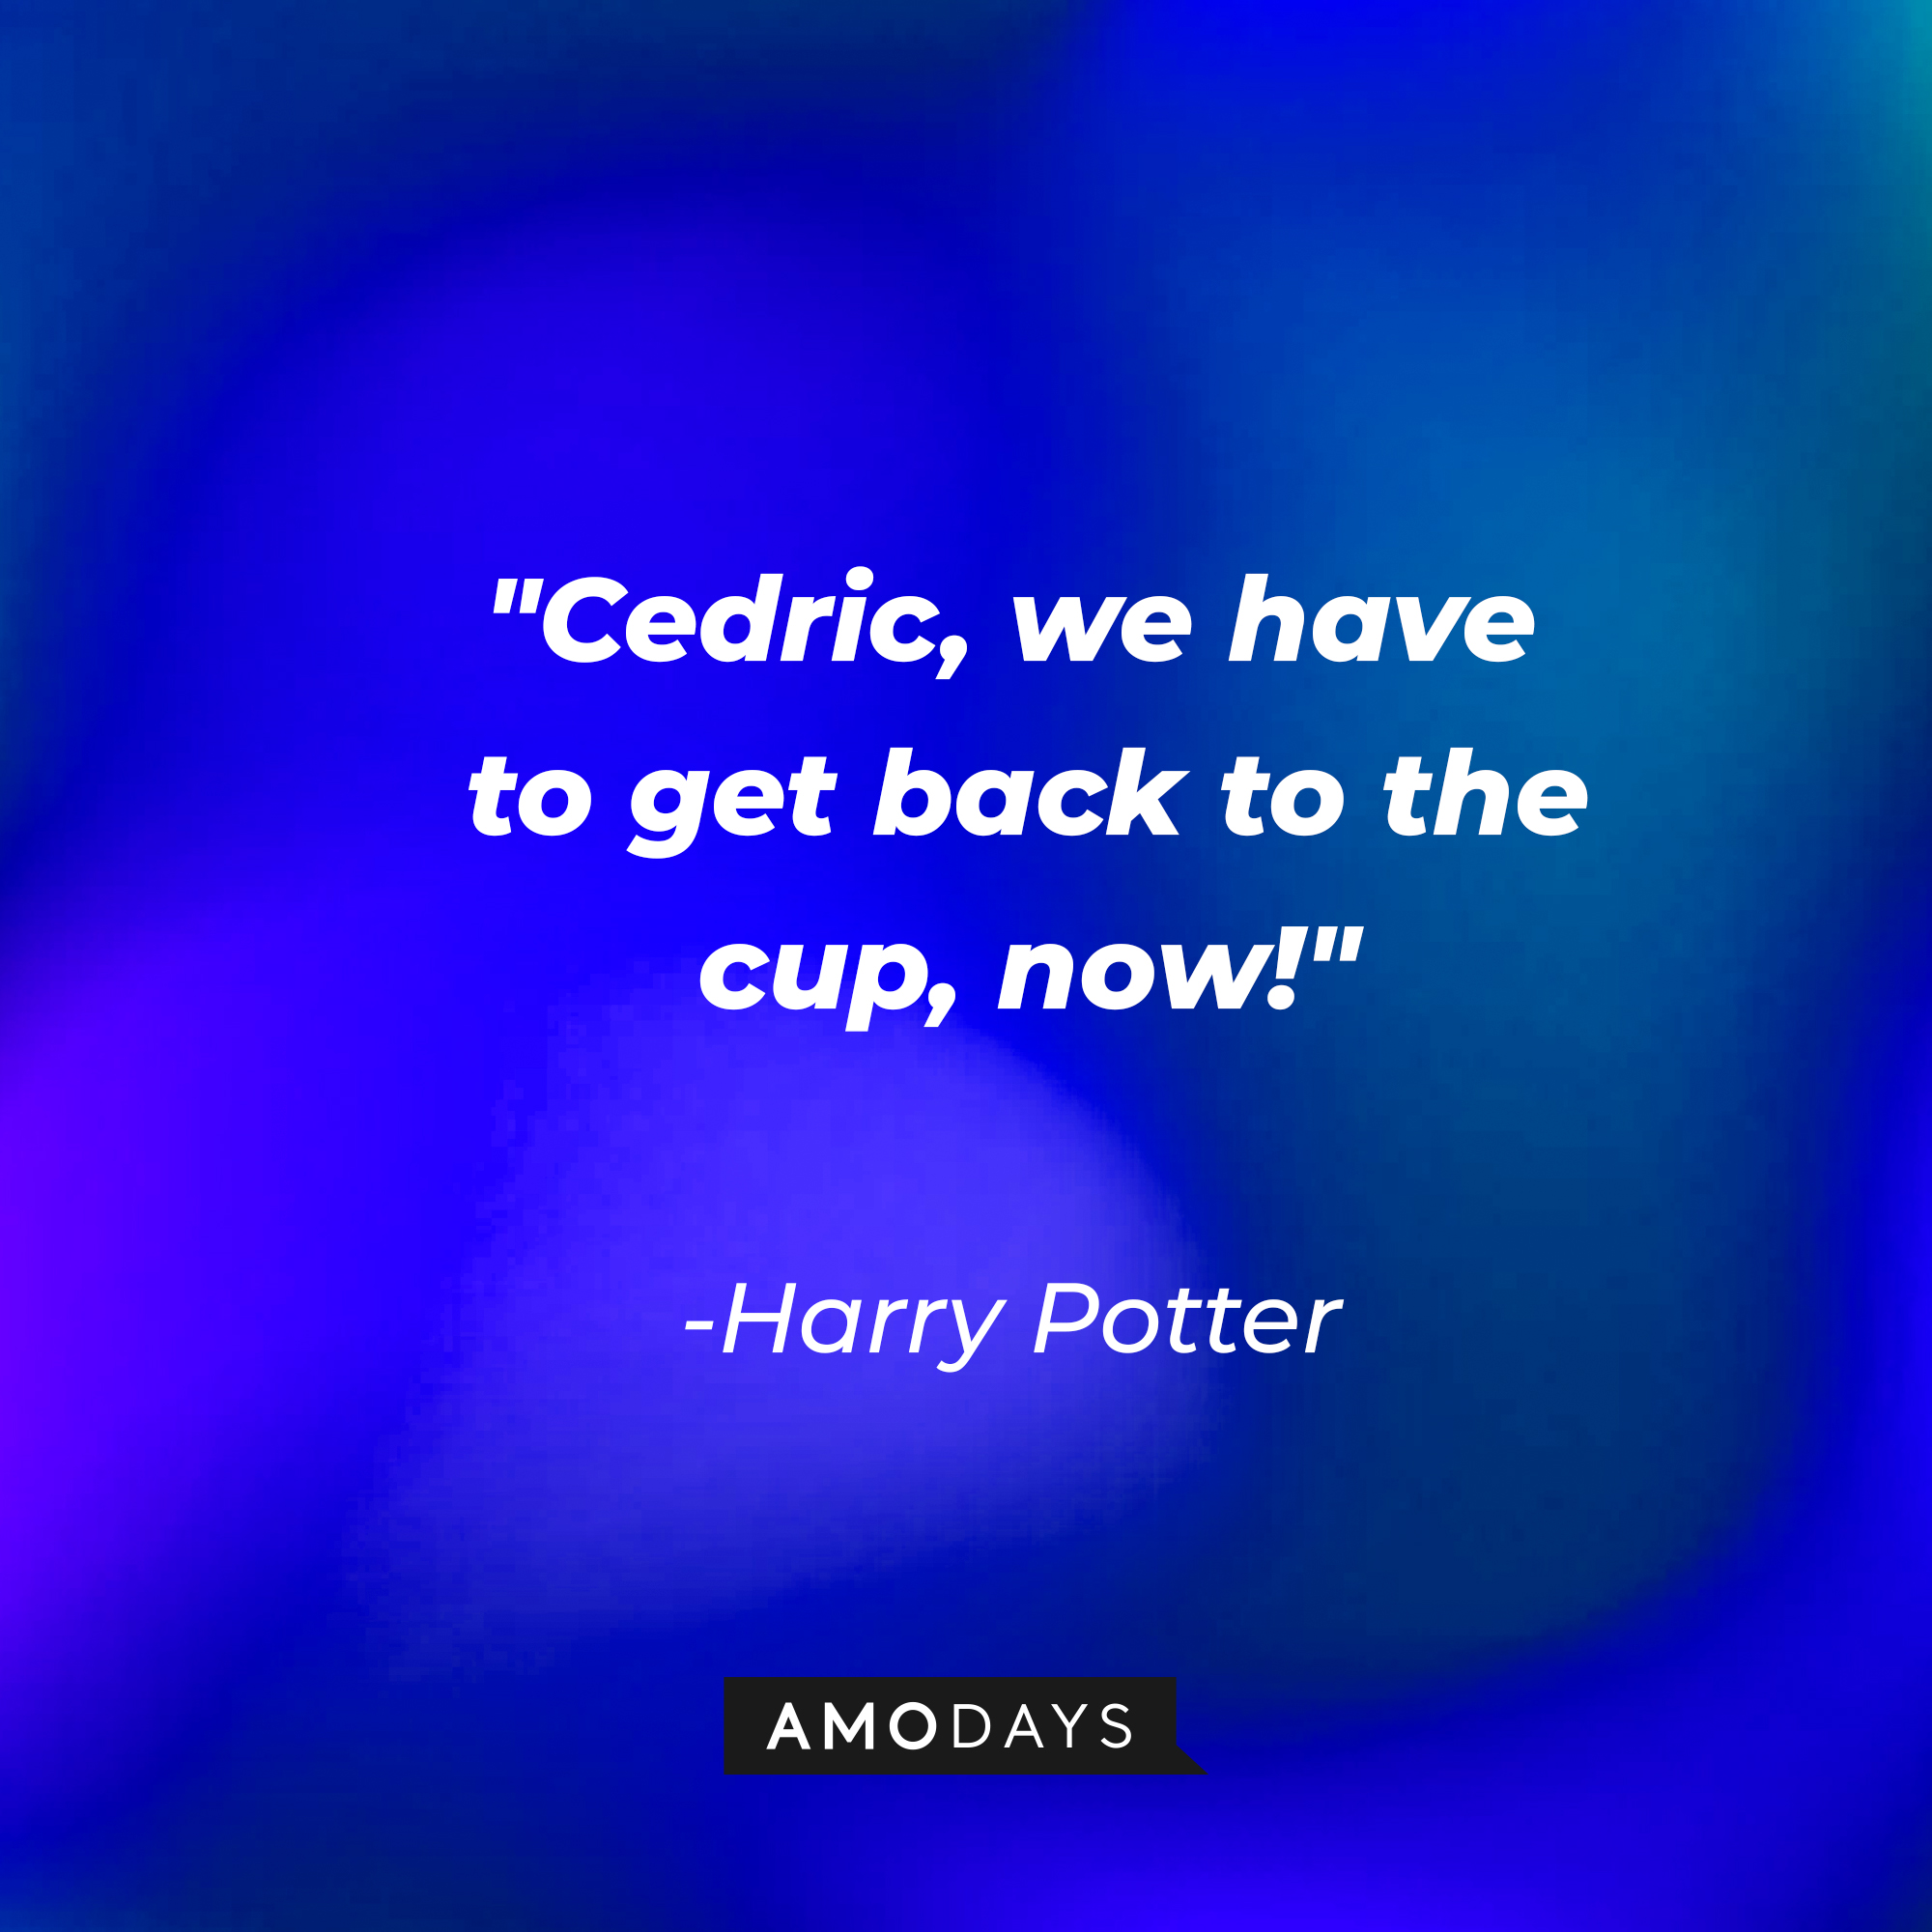 Harry Potter's quote: "Cedric, we have to get back up to the cup, now!" | Image: Amodays